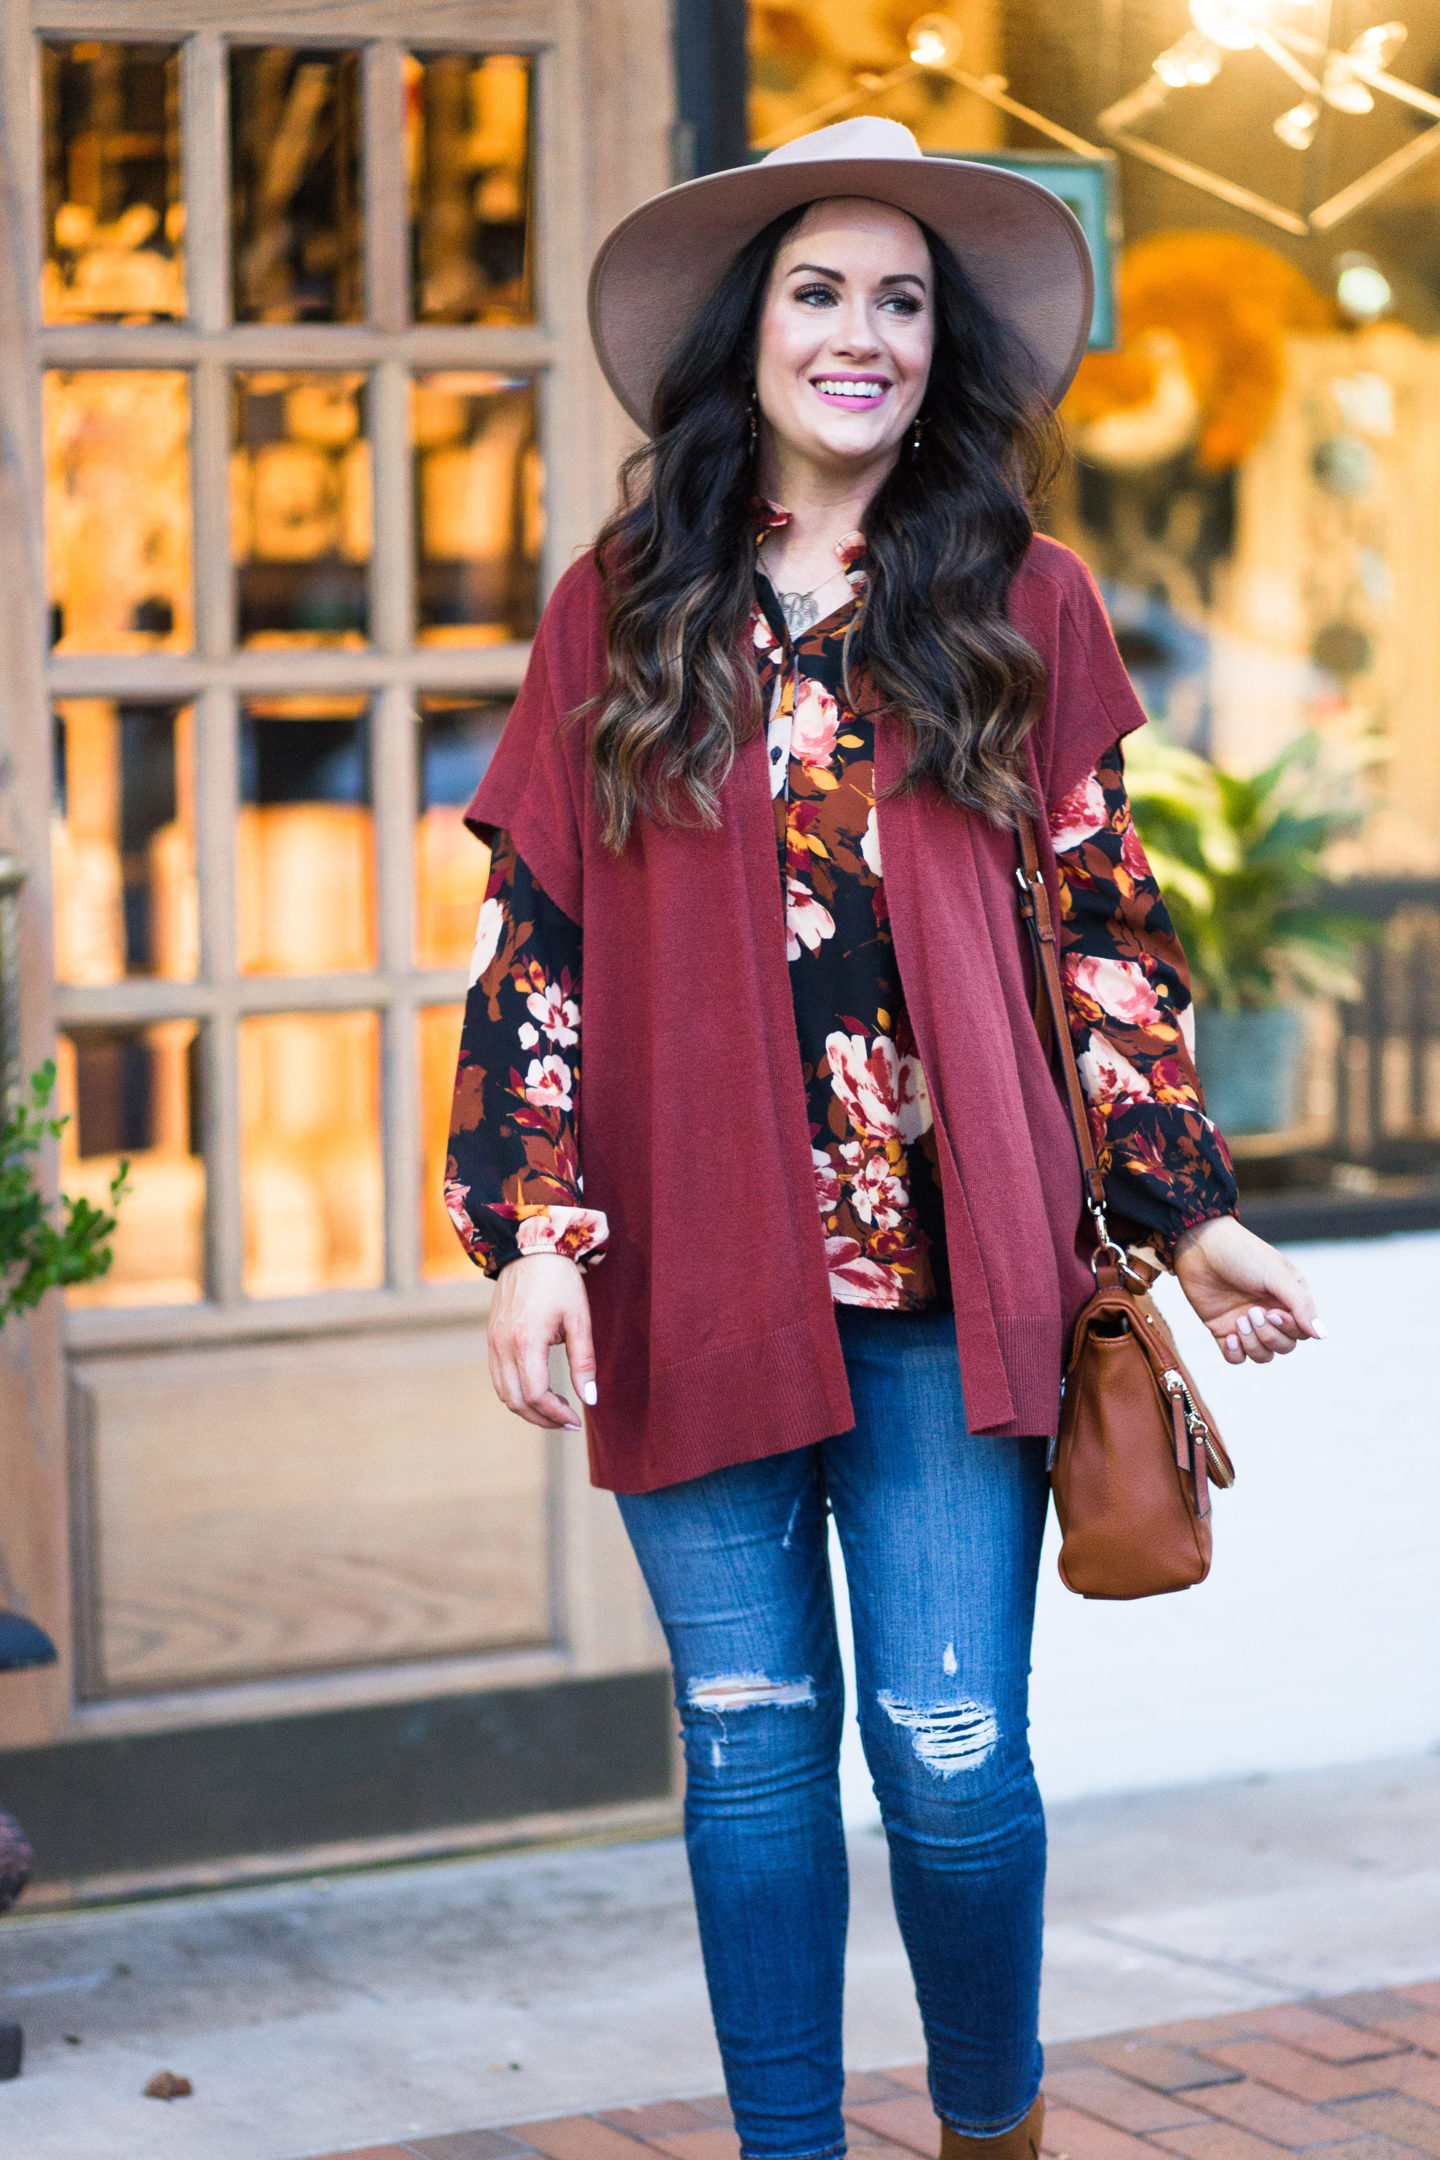 Gibson x Fall Refresh Now At Nordstrom! - The Double Take Girls